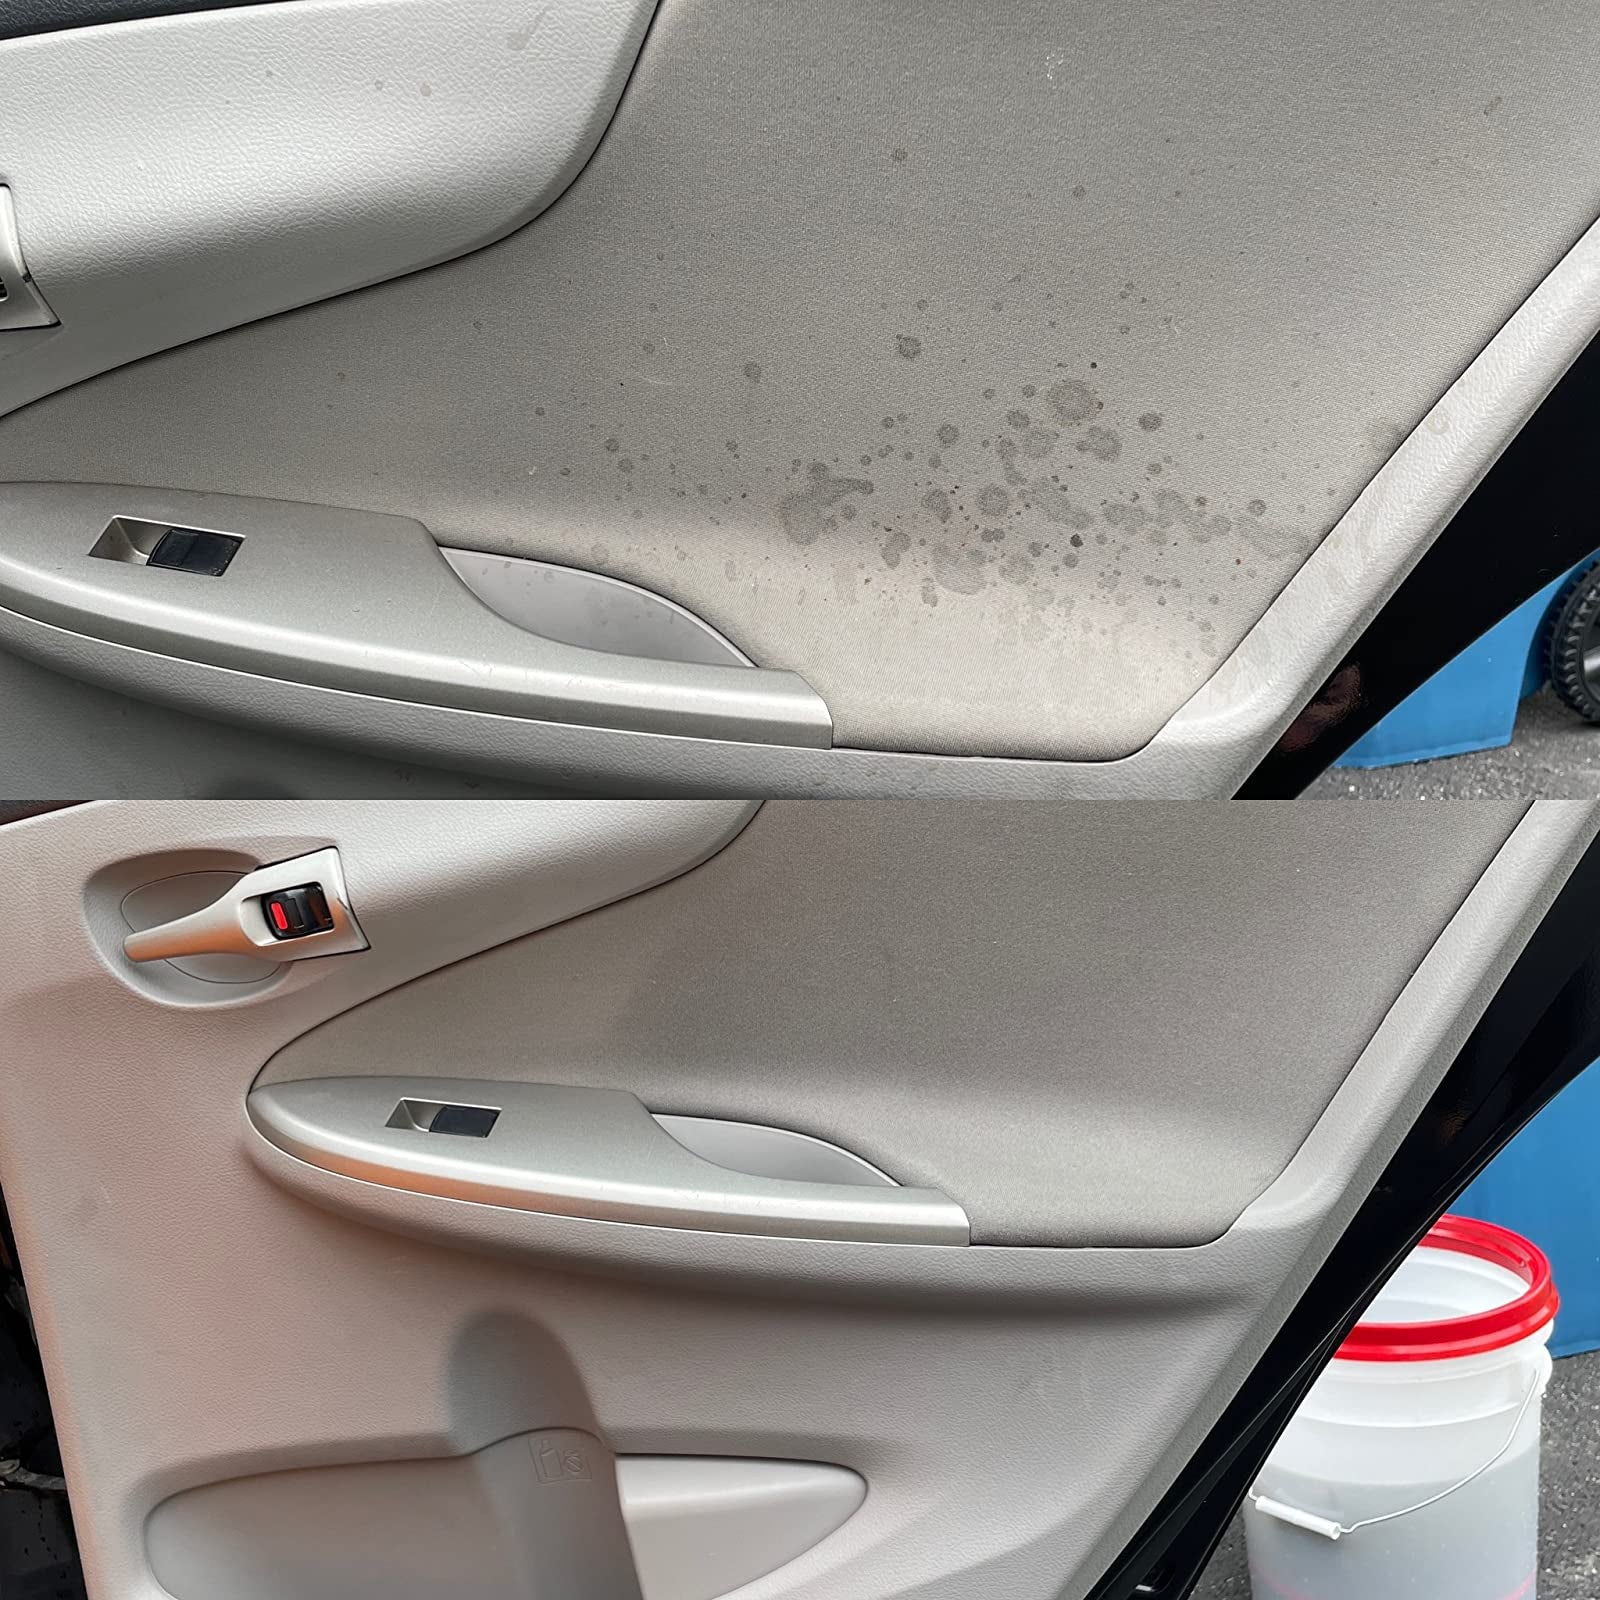 A before/after of a splotchy stain being removed from a reviewer's car door interior